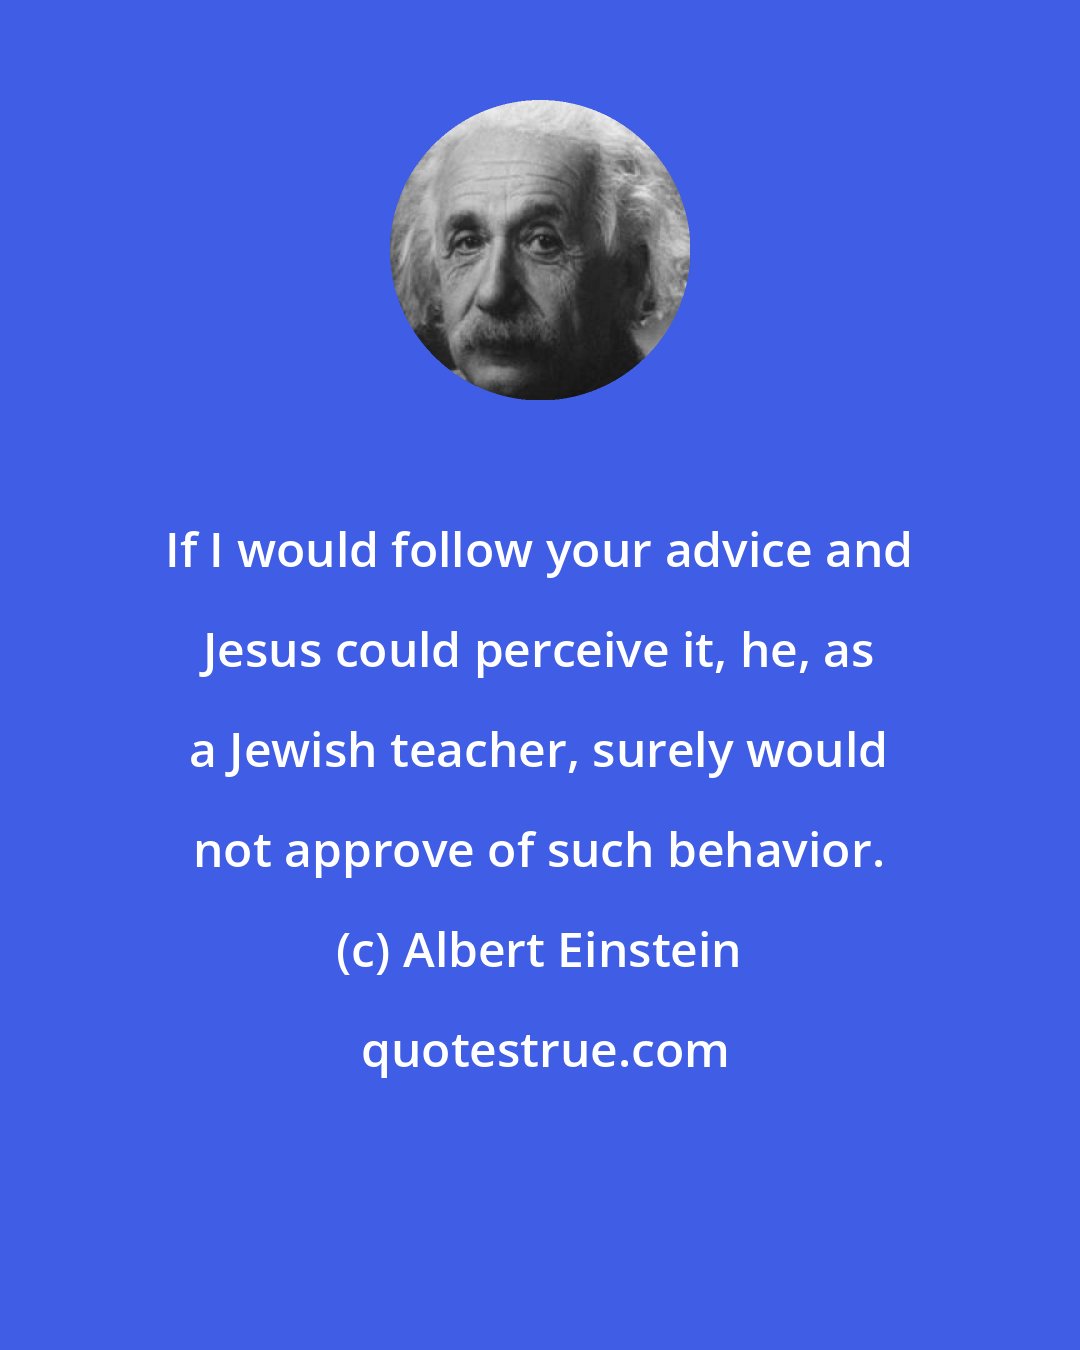 Albert Einstein: If I would follow your advice and Jesus could perceive it, he, as a Jewish teacher, surely would not approve of such behavior.